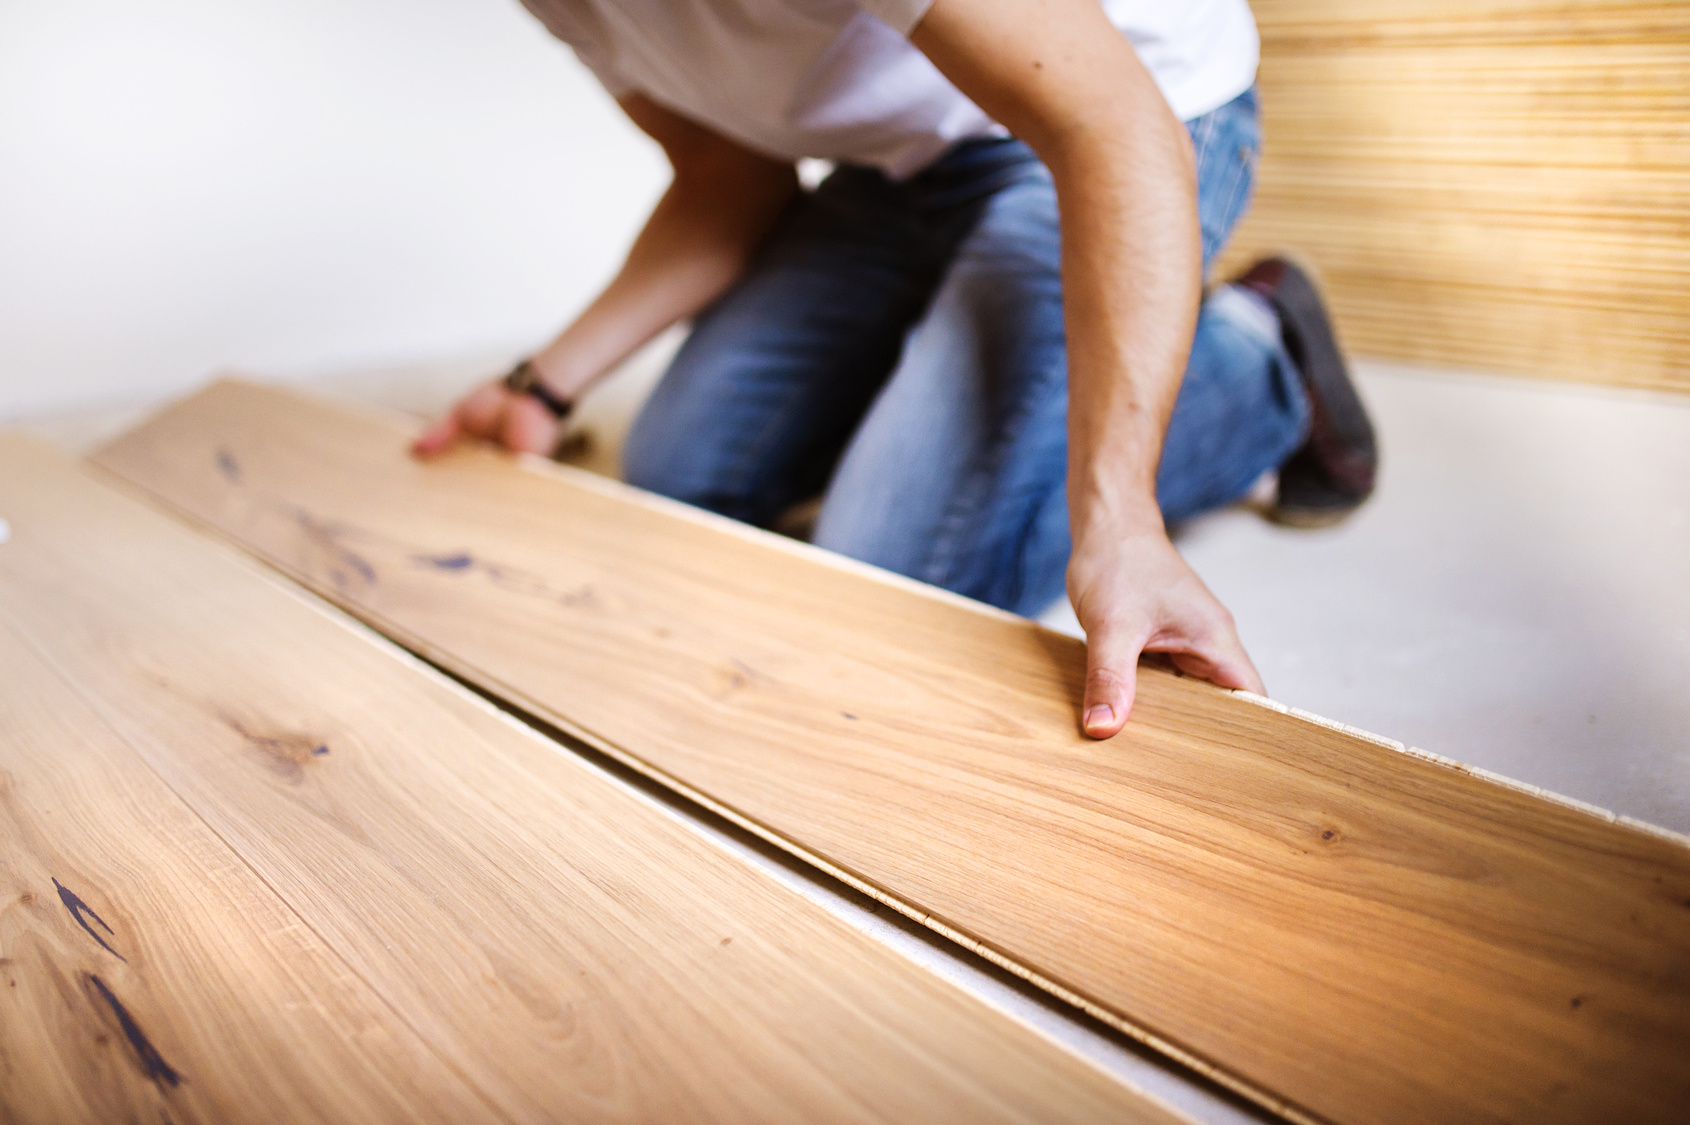 5 Benefits Of Hiring Professionals To Install New Flooring | My Decorative